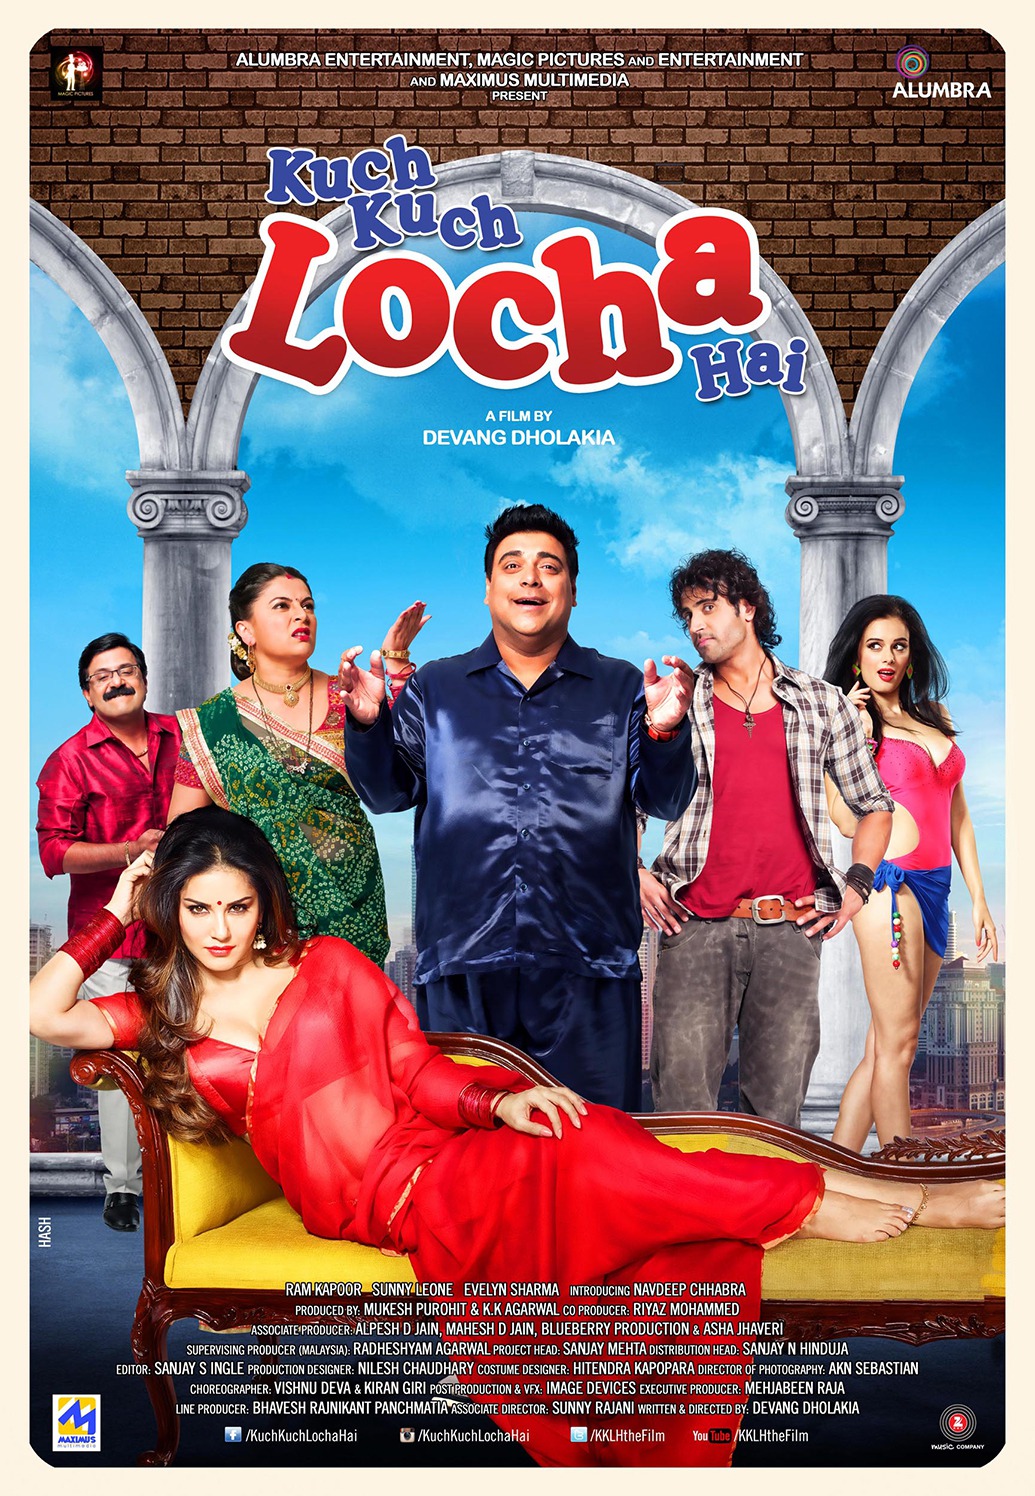 Extra Large Movie Poster Image for Kuch Kuch Locha Hai (#5 of 7)